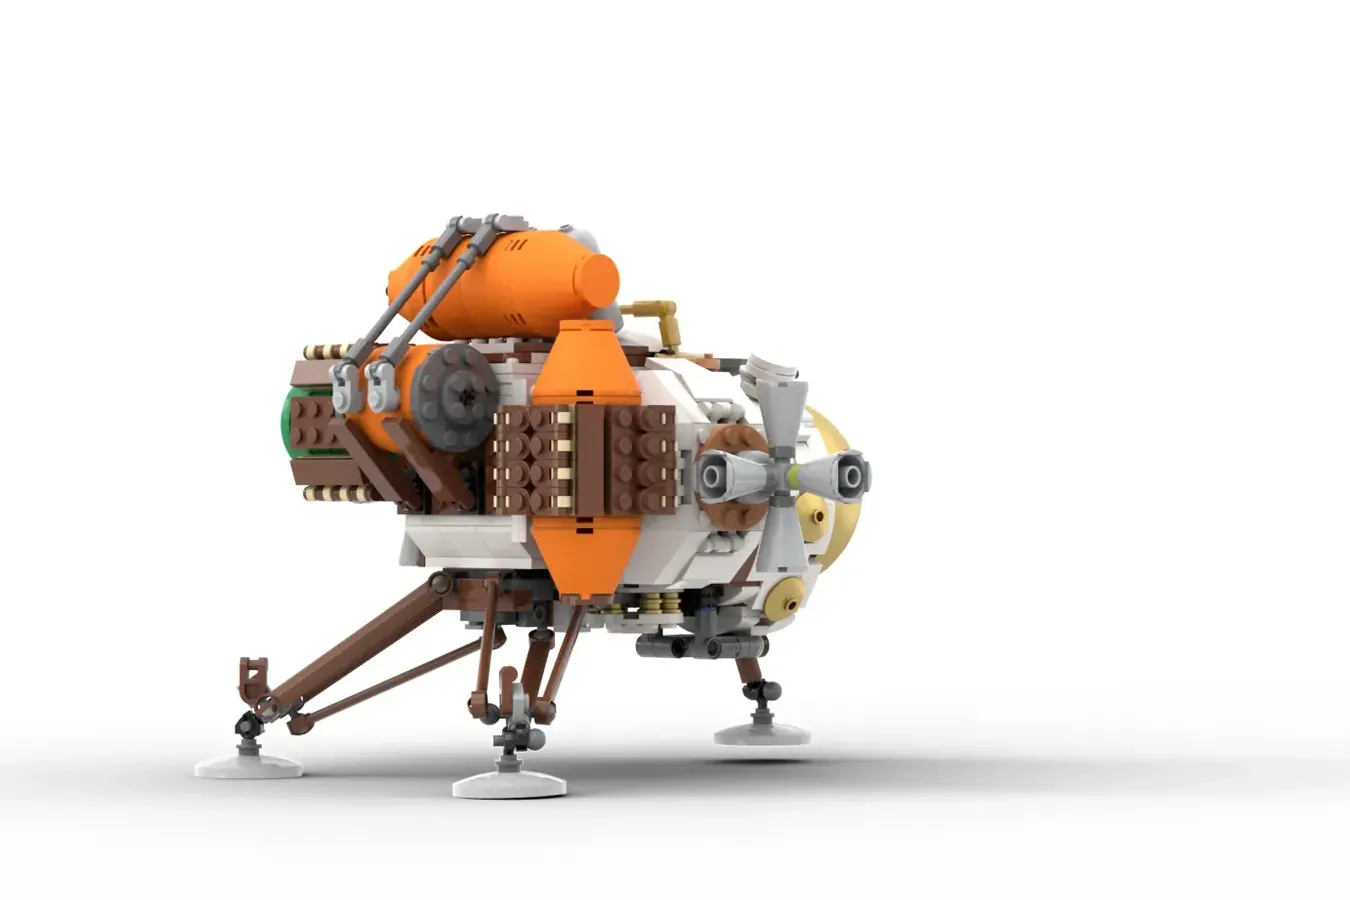 LEGO IDEAS - The Hearthean's Ship From Outer Wilds